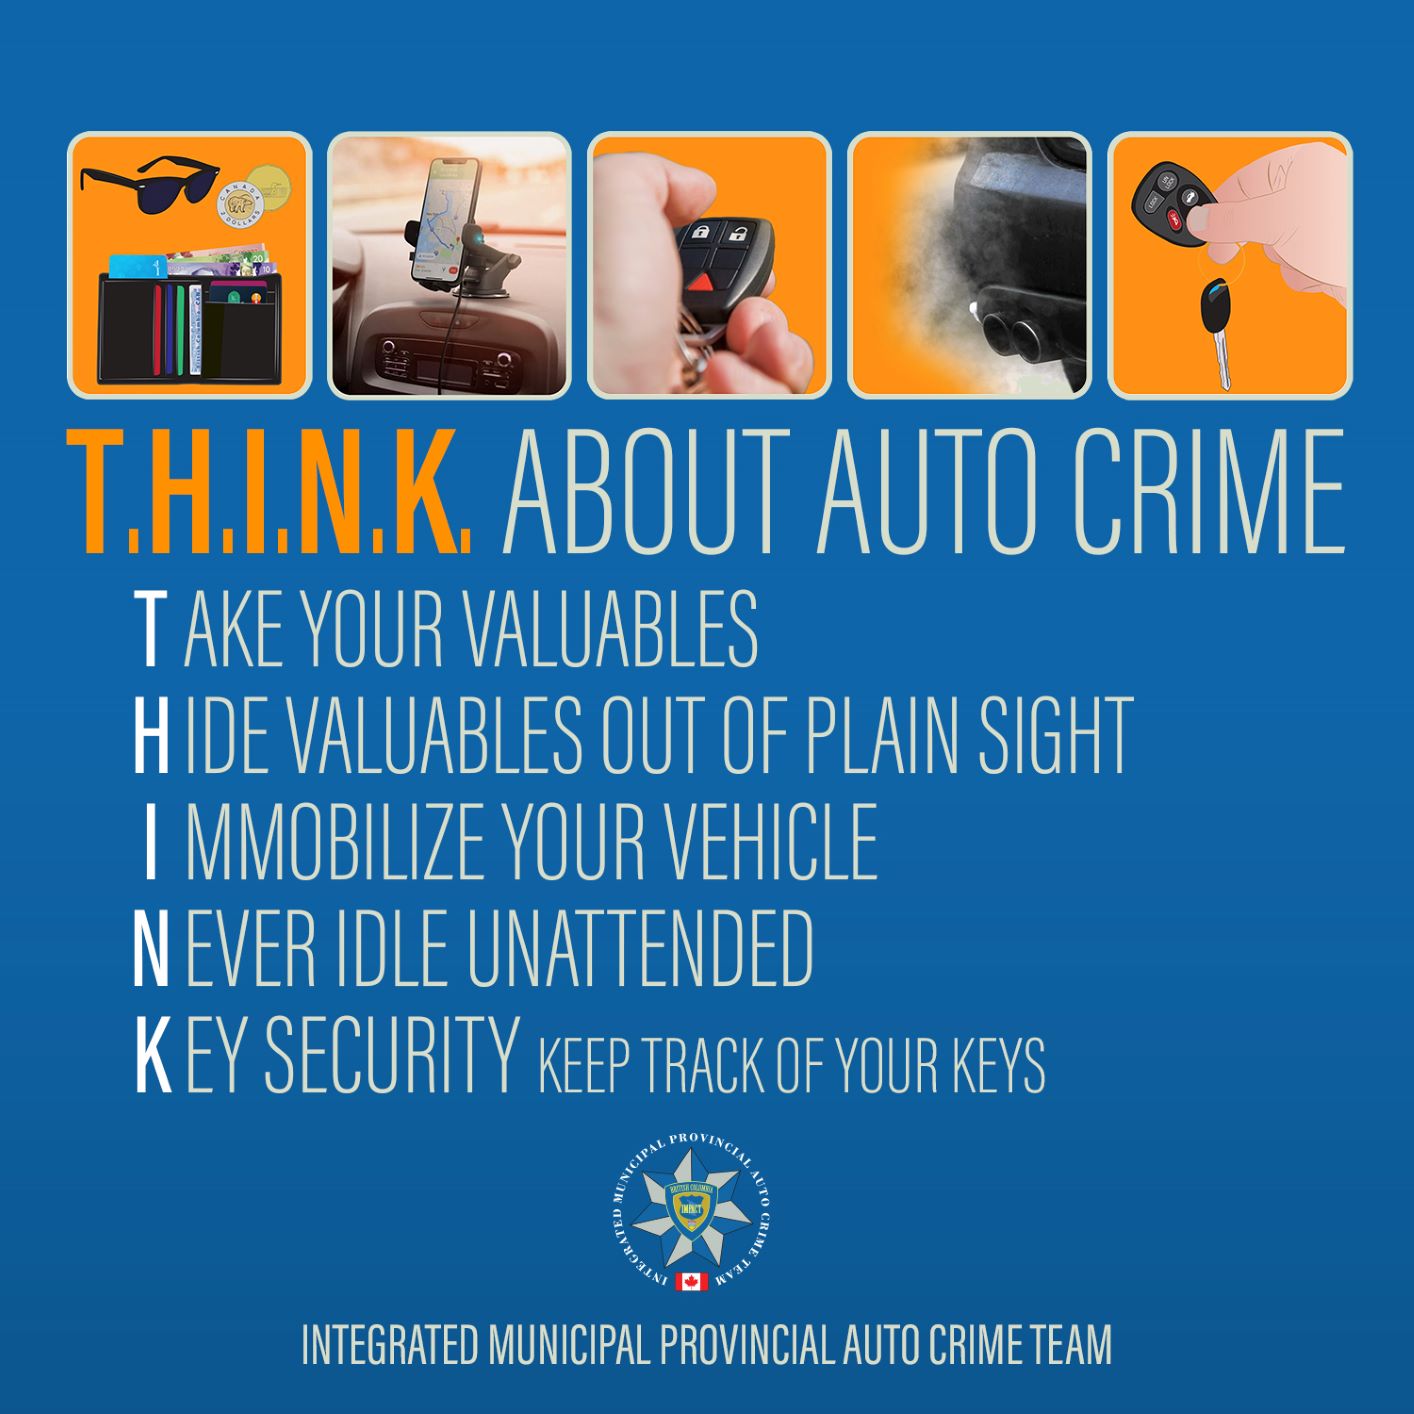 Infographic about auto crime prevention tips